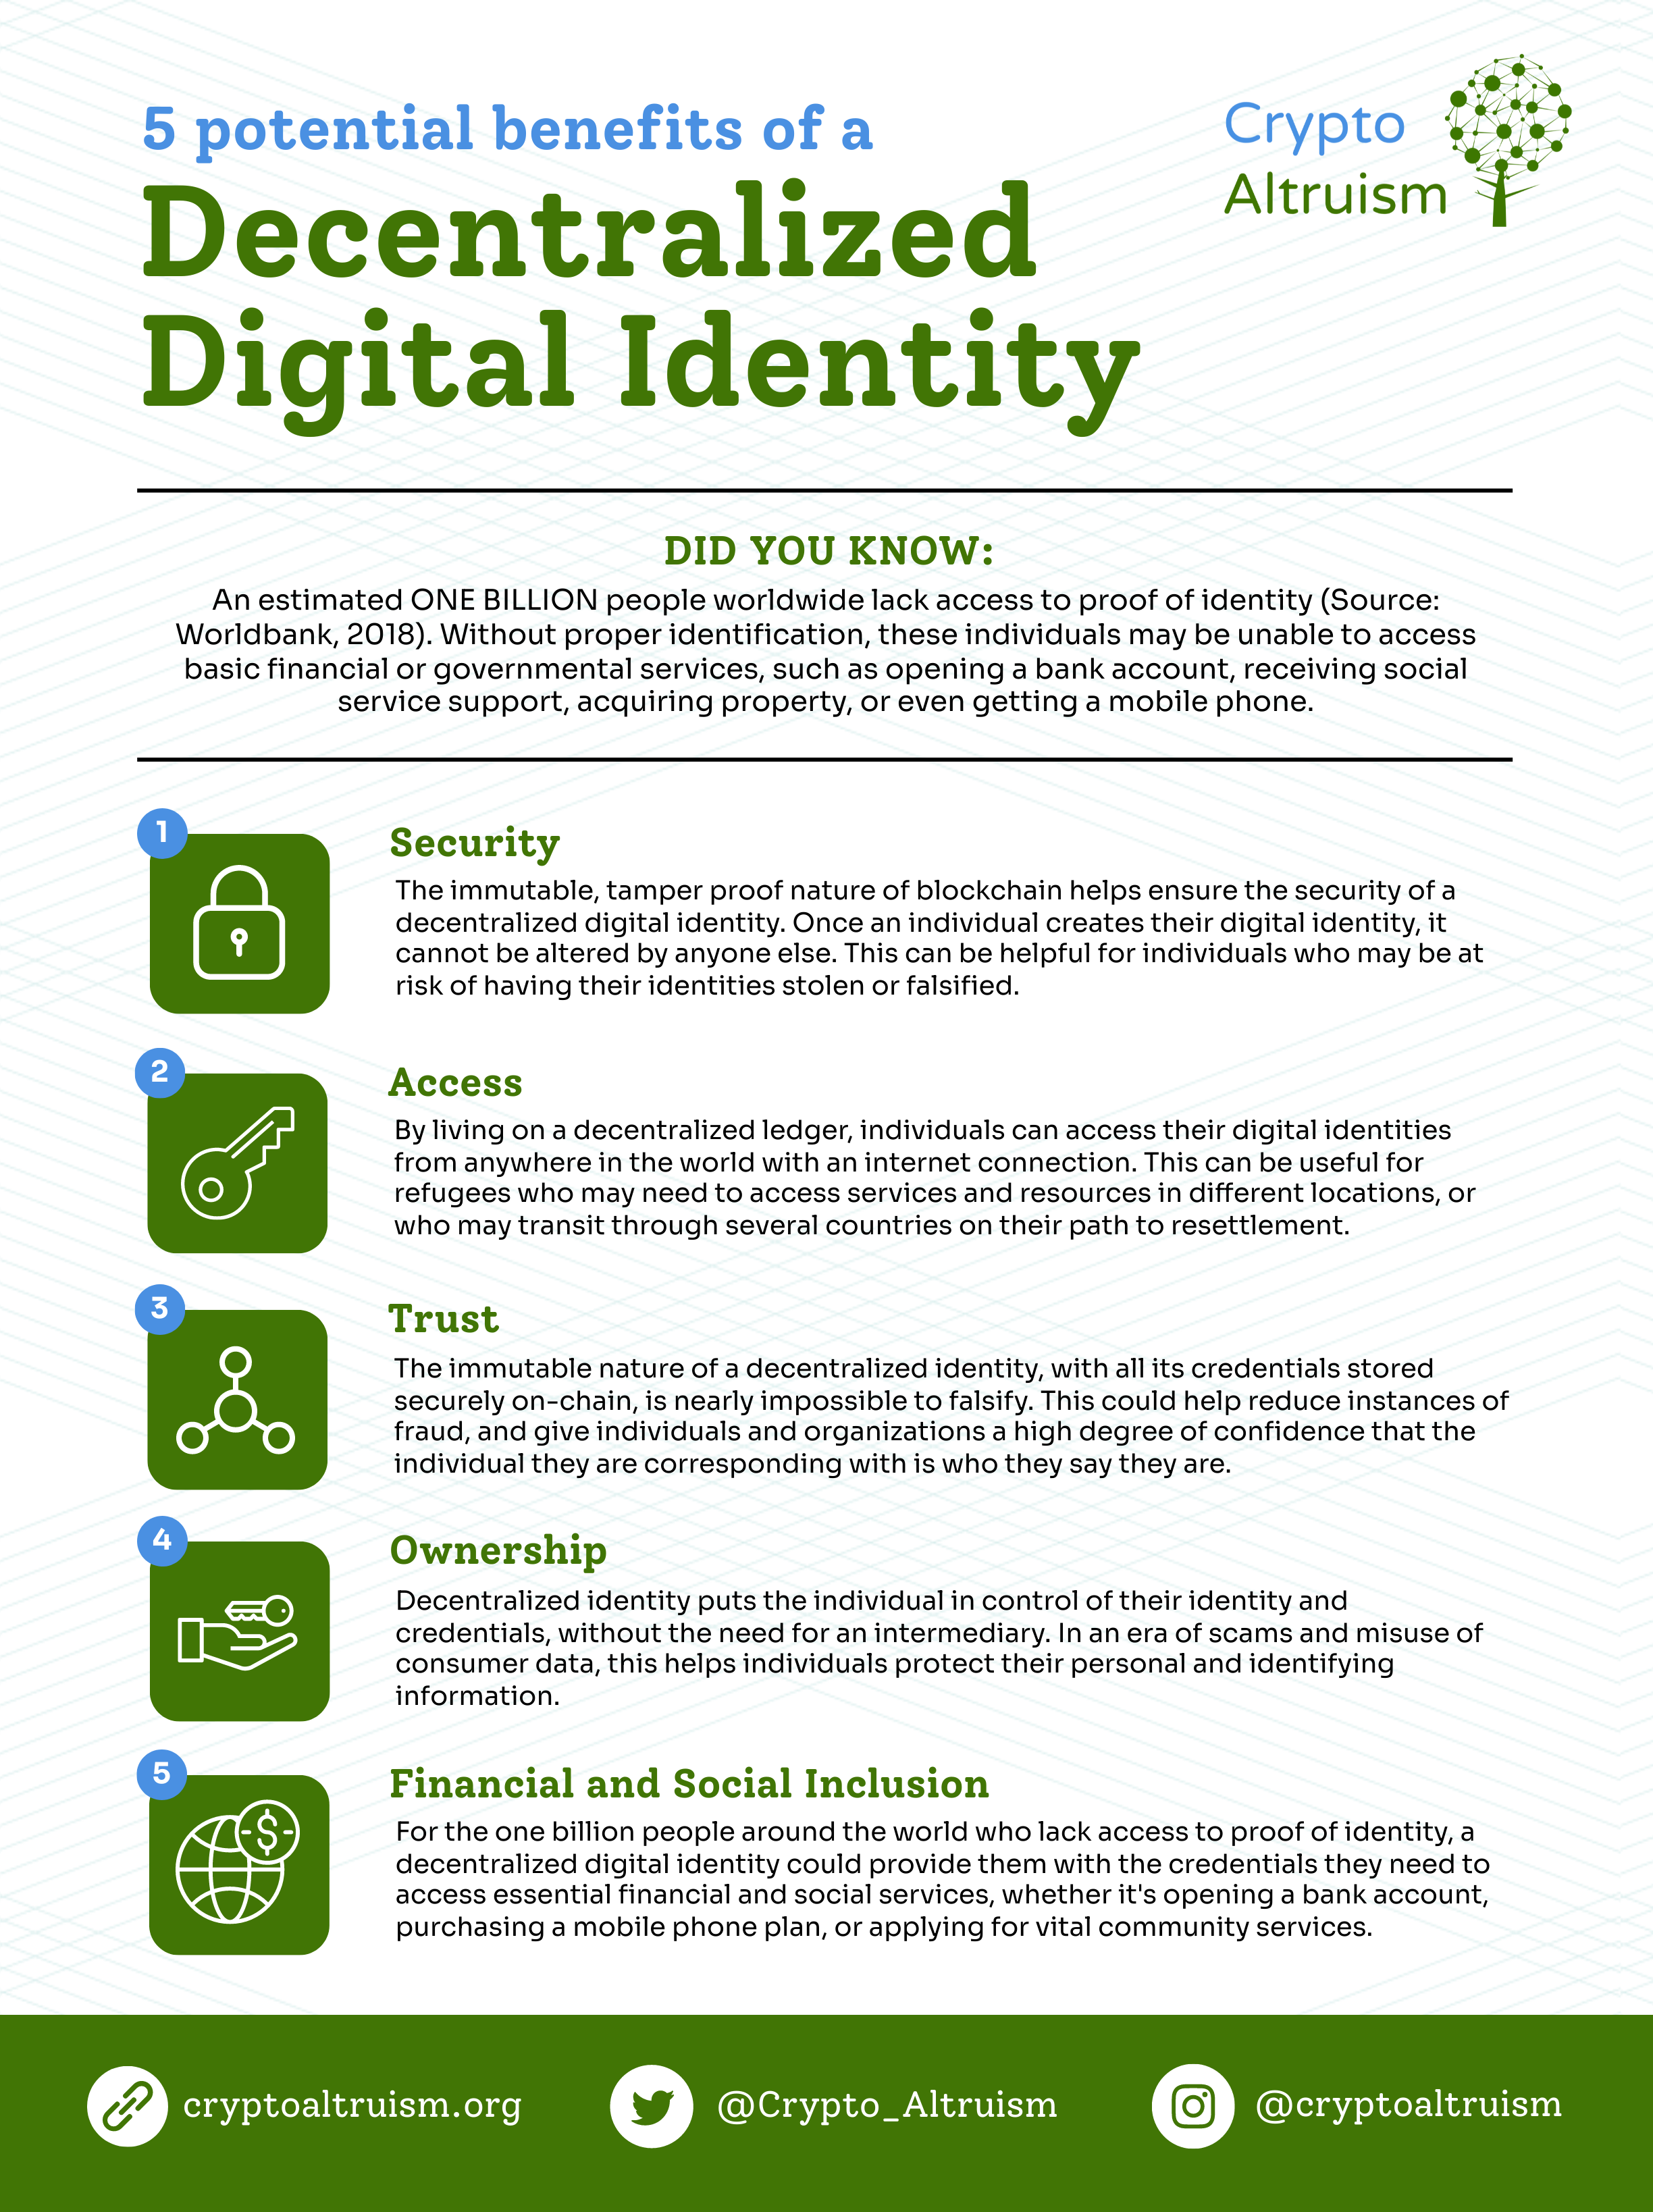 Will They Steal Your Digital Identity?